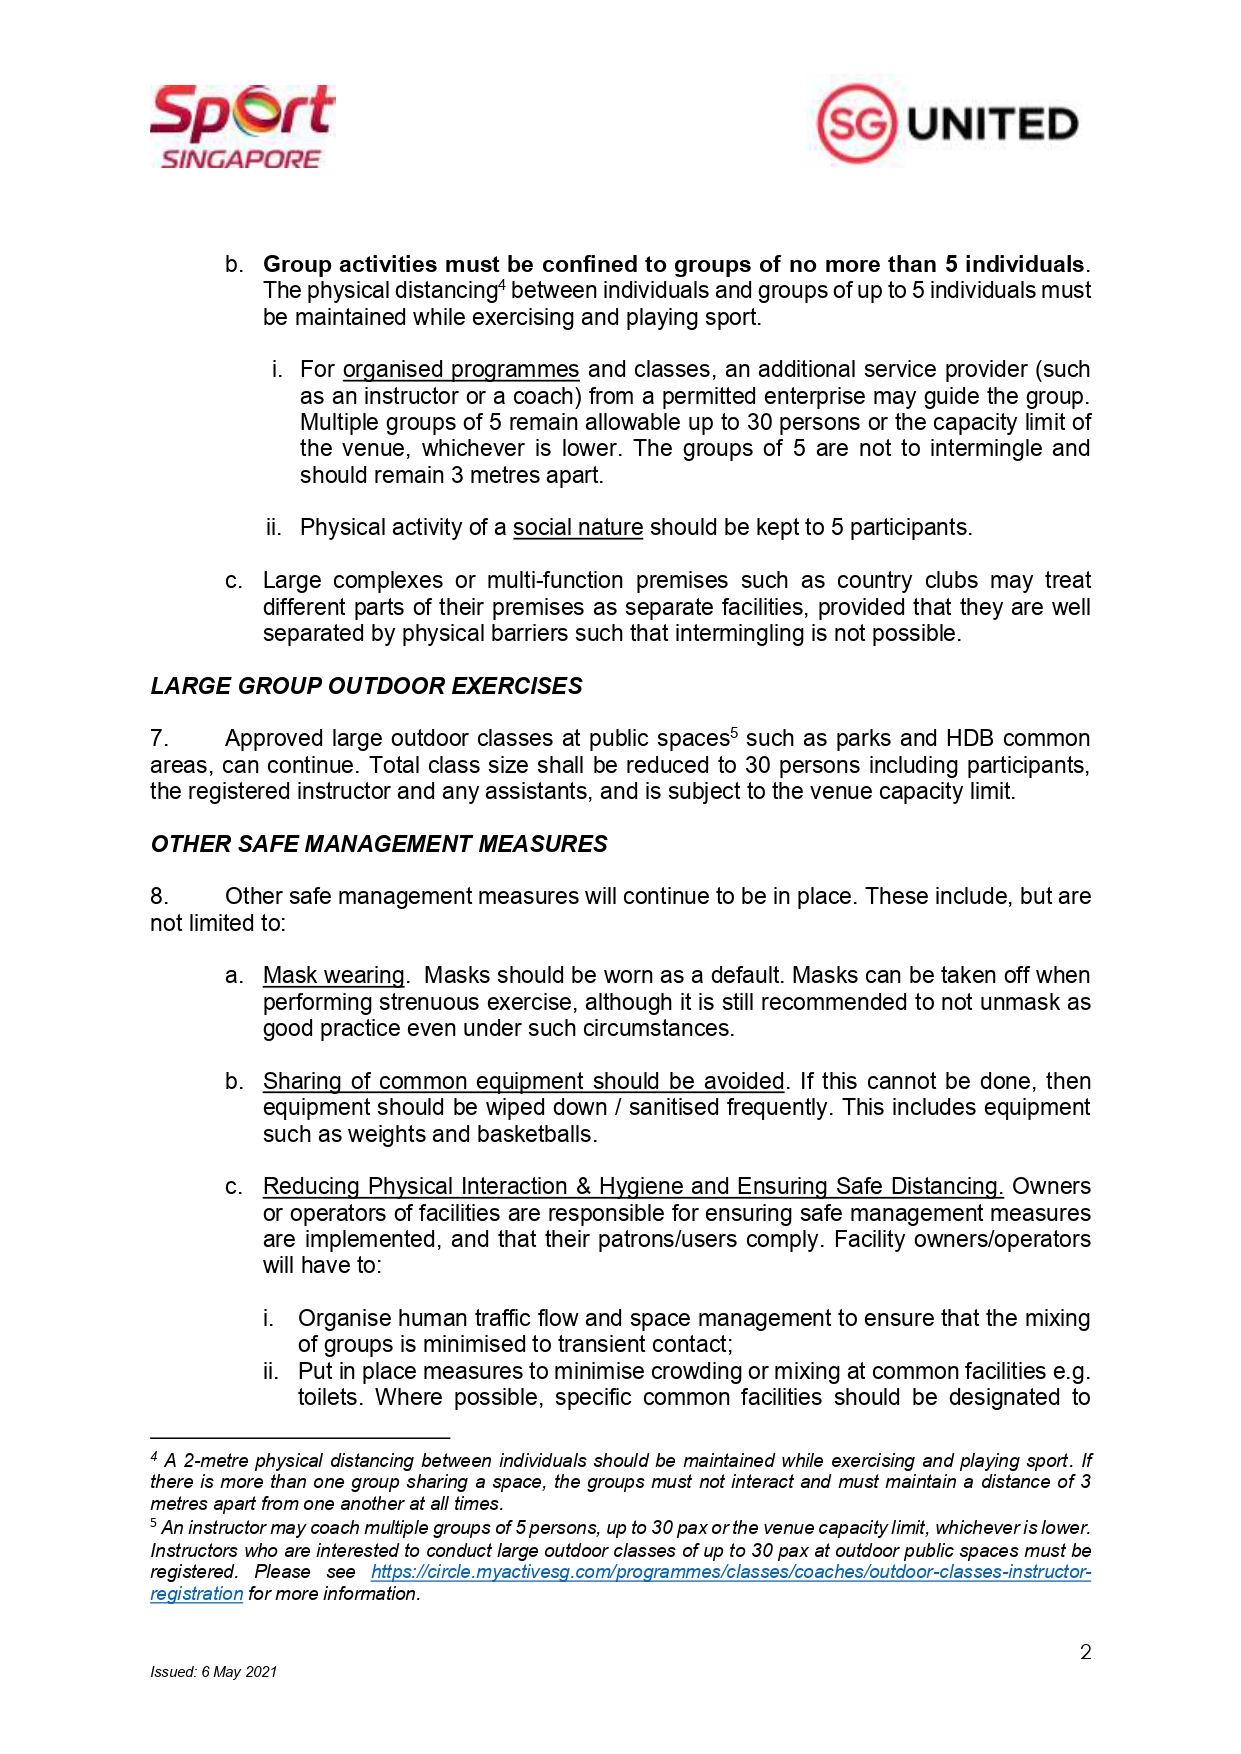 Stricter Safe Management Measures For Sport And Physical Exercise and Activity (8 to 30 May 2021)_pages-to-jpg-0002